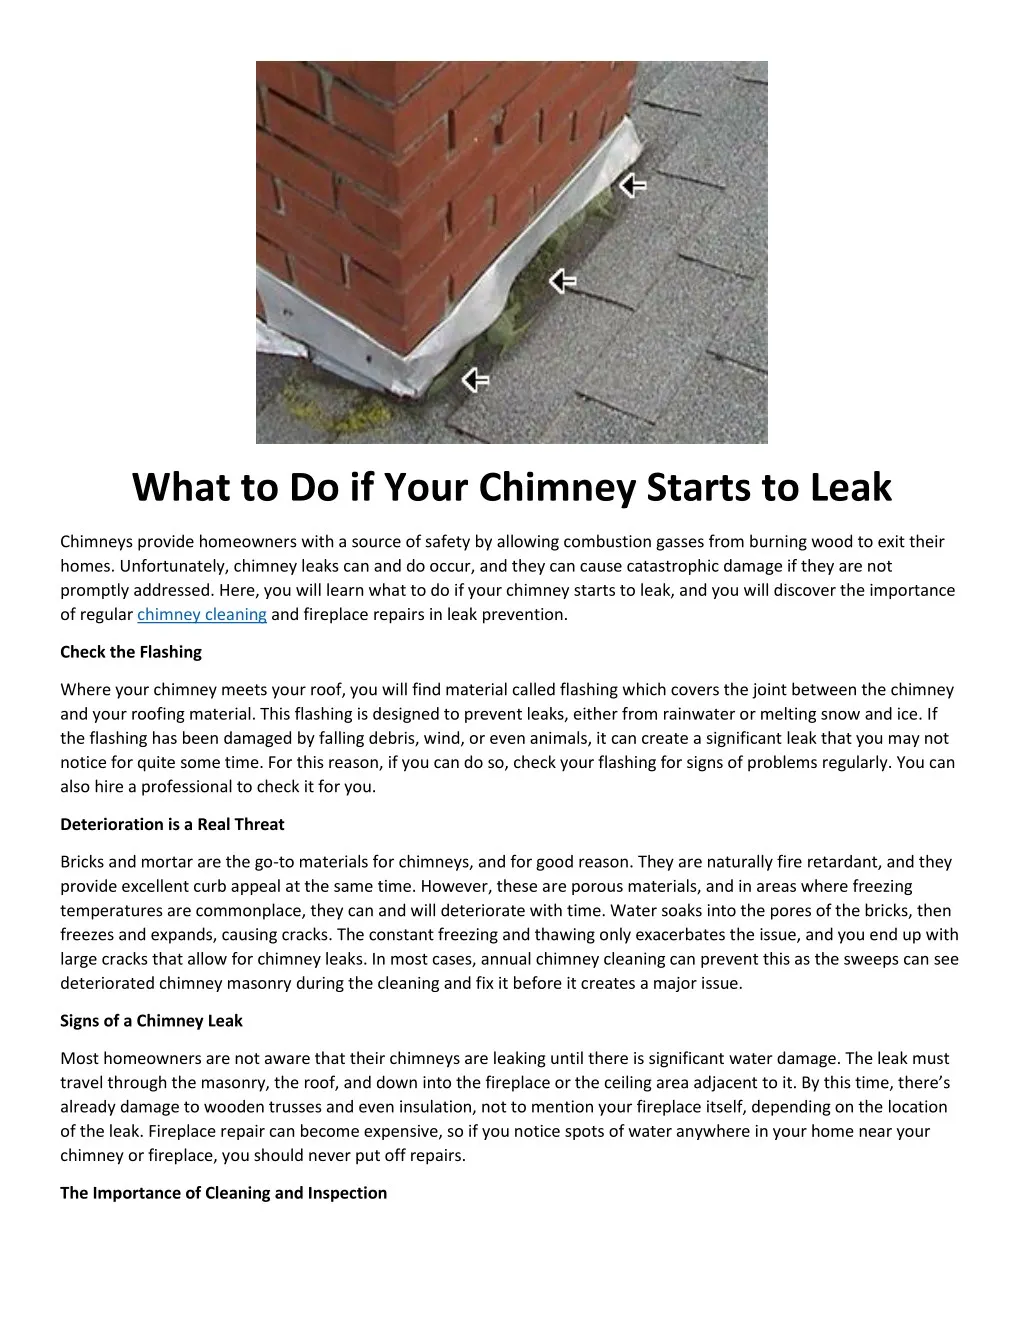 what to do if your chimney starts to leak